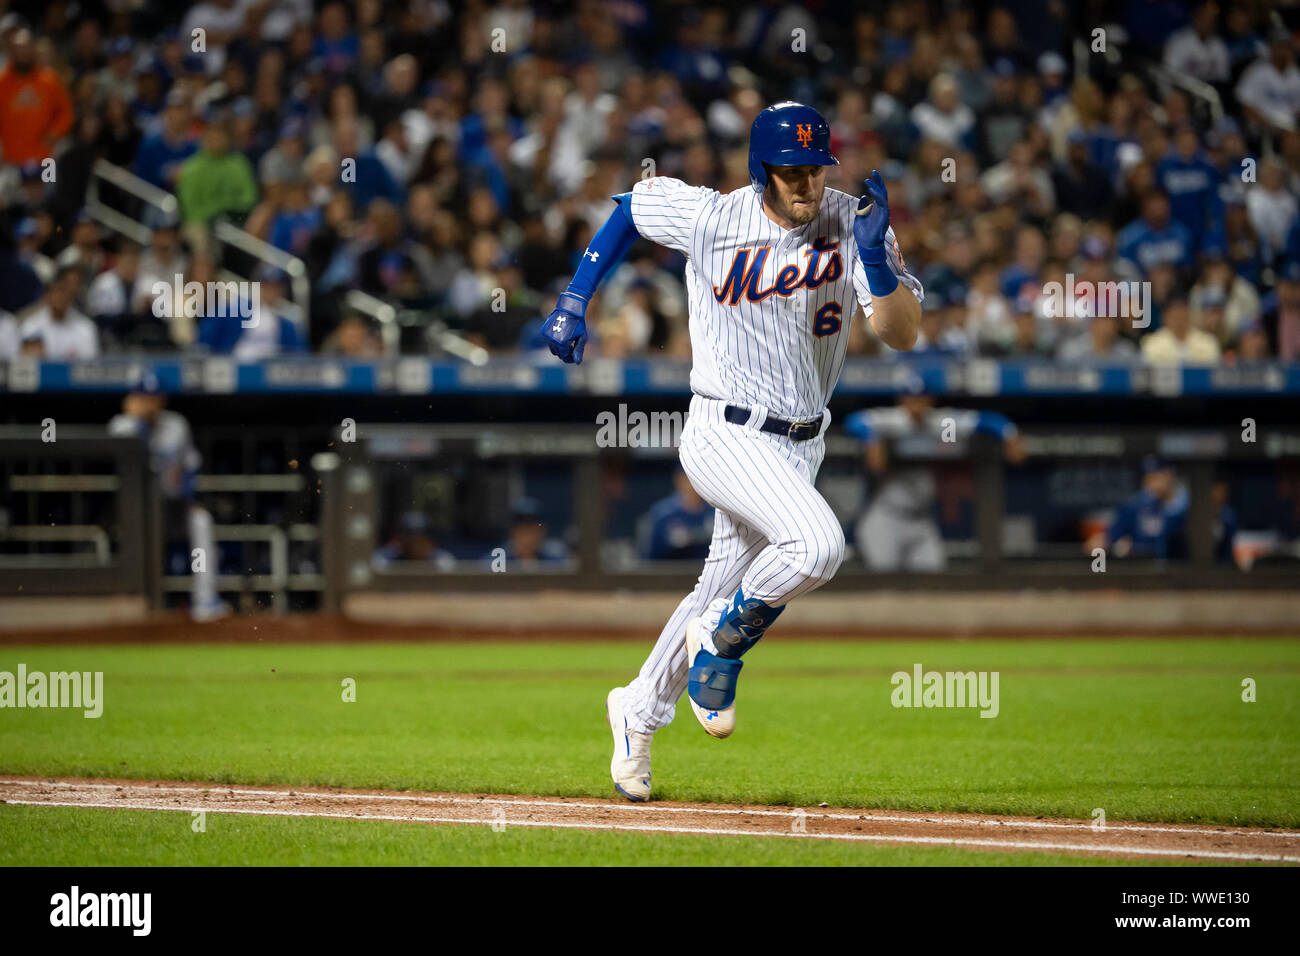 Queens, New York, USA. 13th Sep, 2019. New York Mets left fielder Jeff McNeil (6) hustles down the first base line during the game between The New York Mets and The Los Angeles Dodgers at Citi Field in Queens, New York. Mandatory credit: Kostas Lymperopoulos/CSM/Alamy Live News Stock Photo